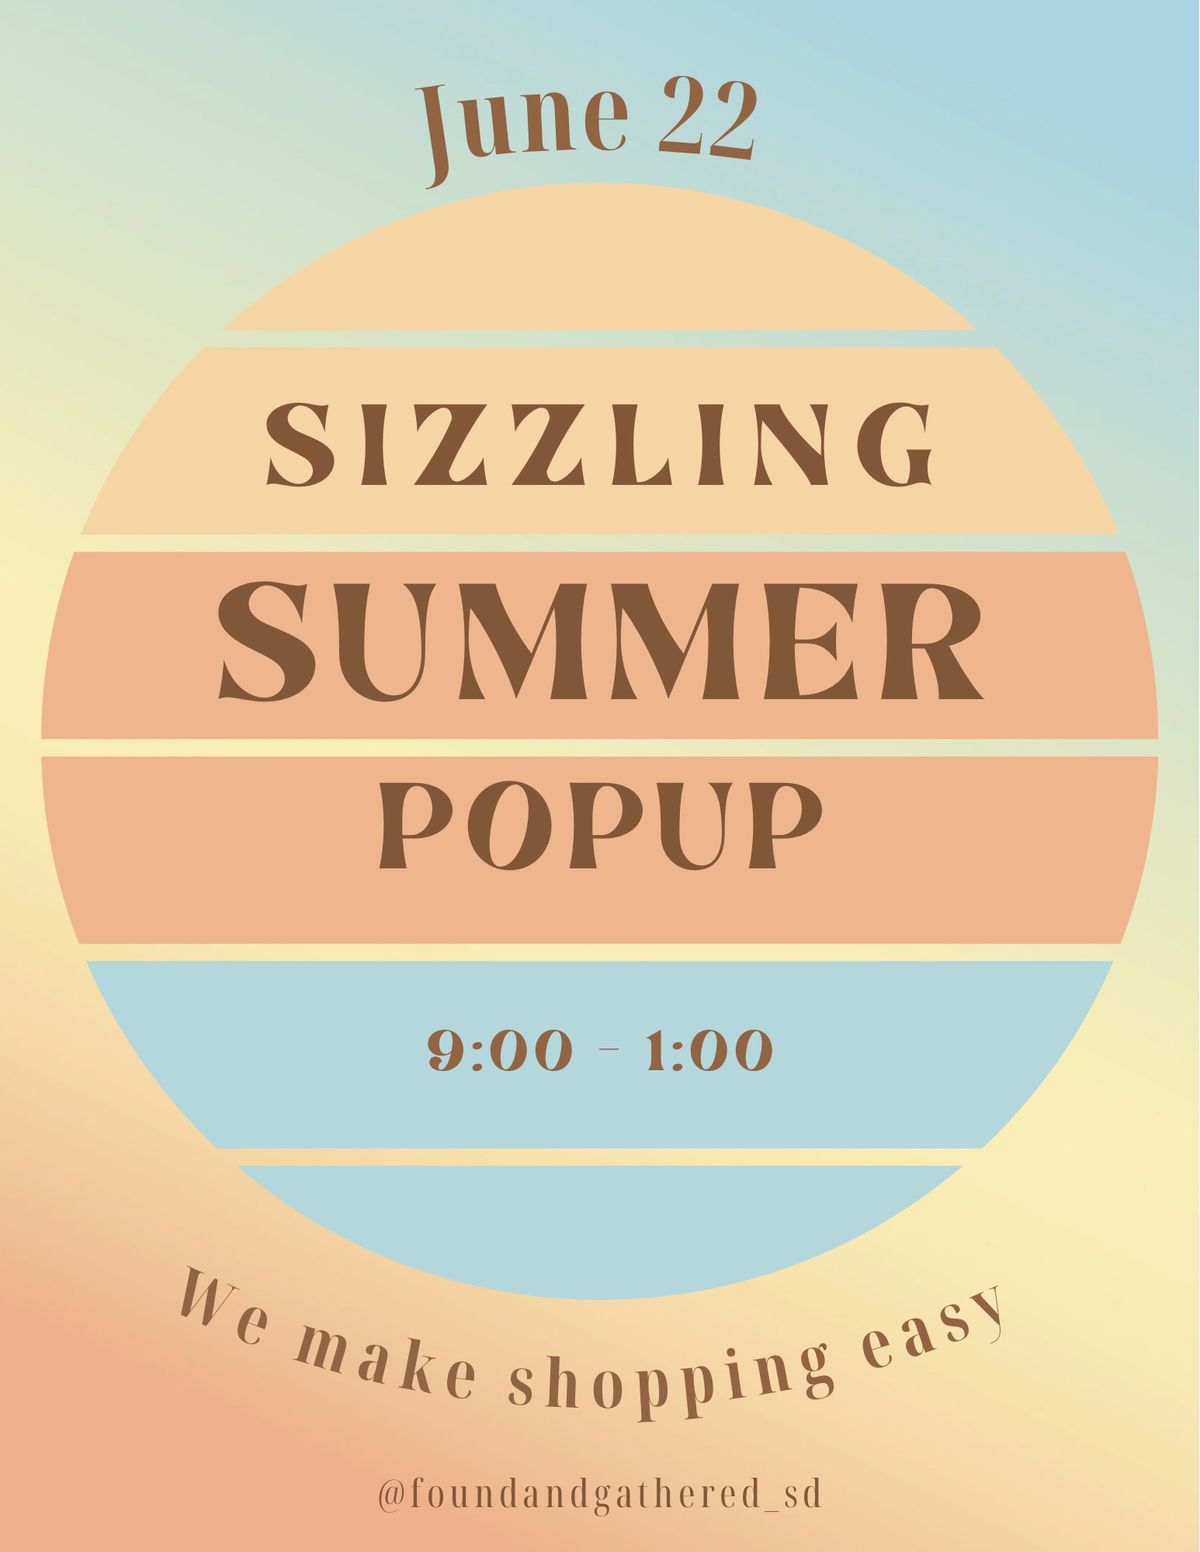 Sizzling Summer PopUp